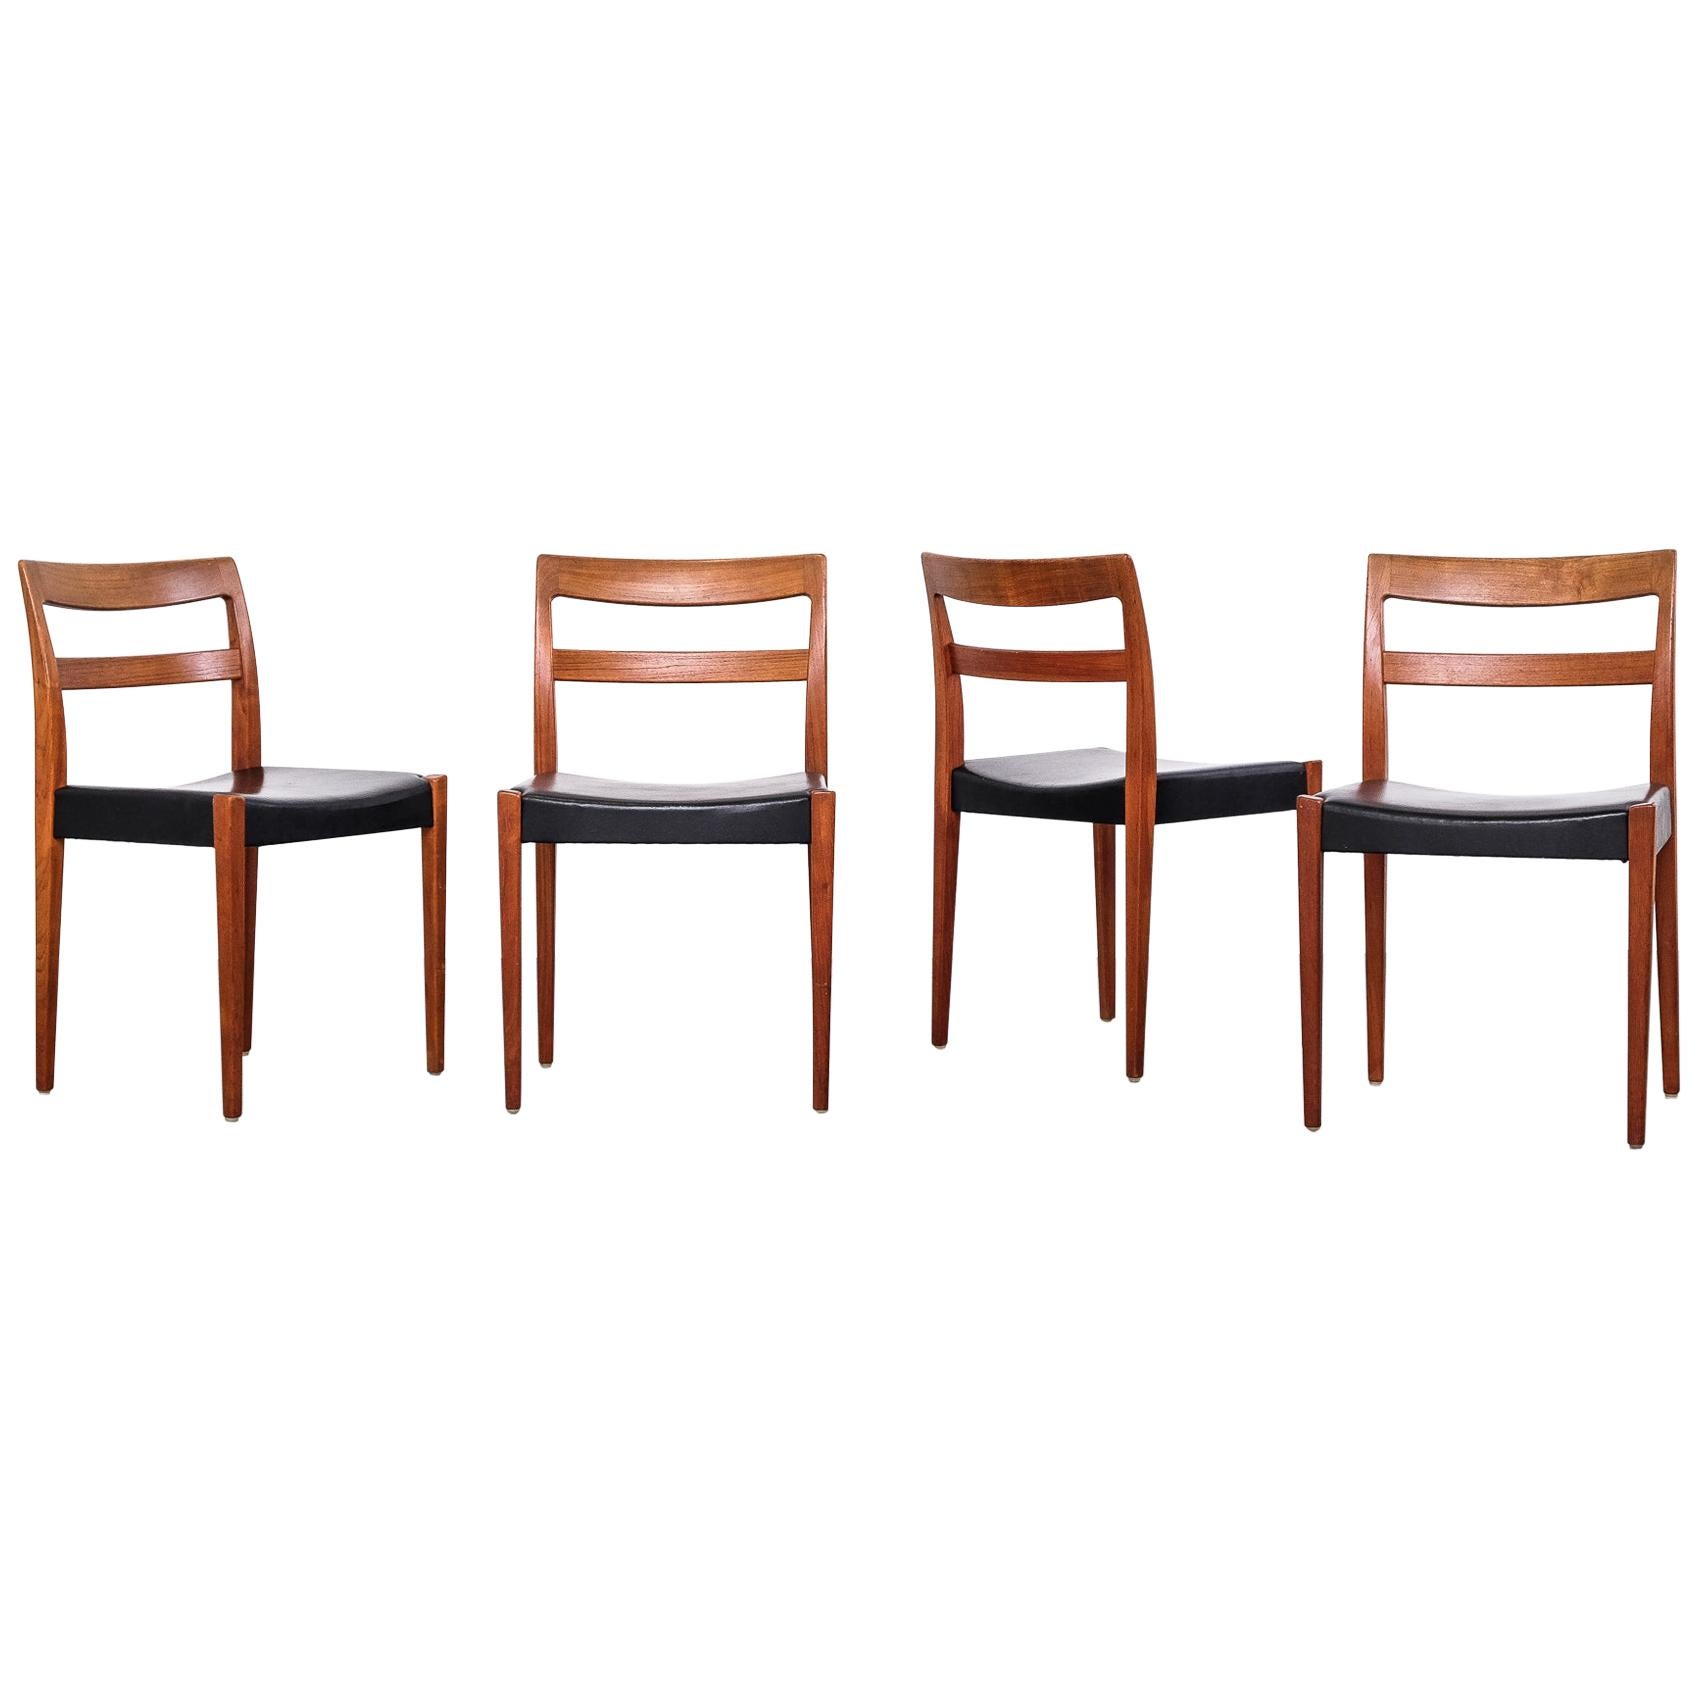 ”Garmi” Teak Dining Chairs by Nils Jonsson for Troeds, Set of 4